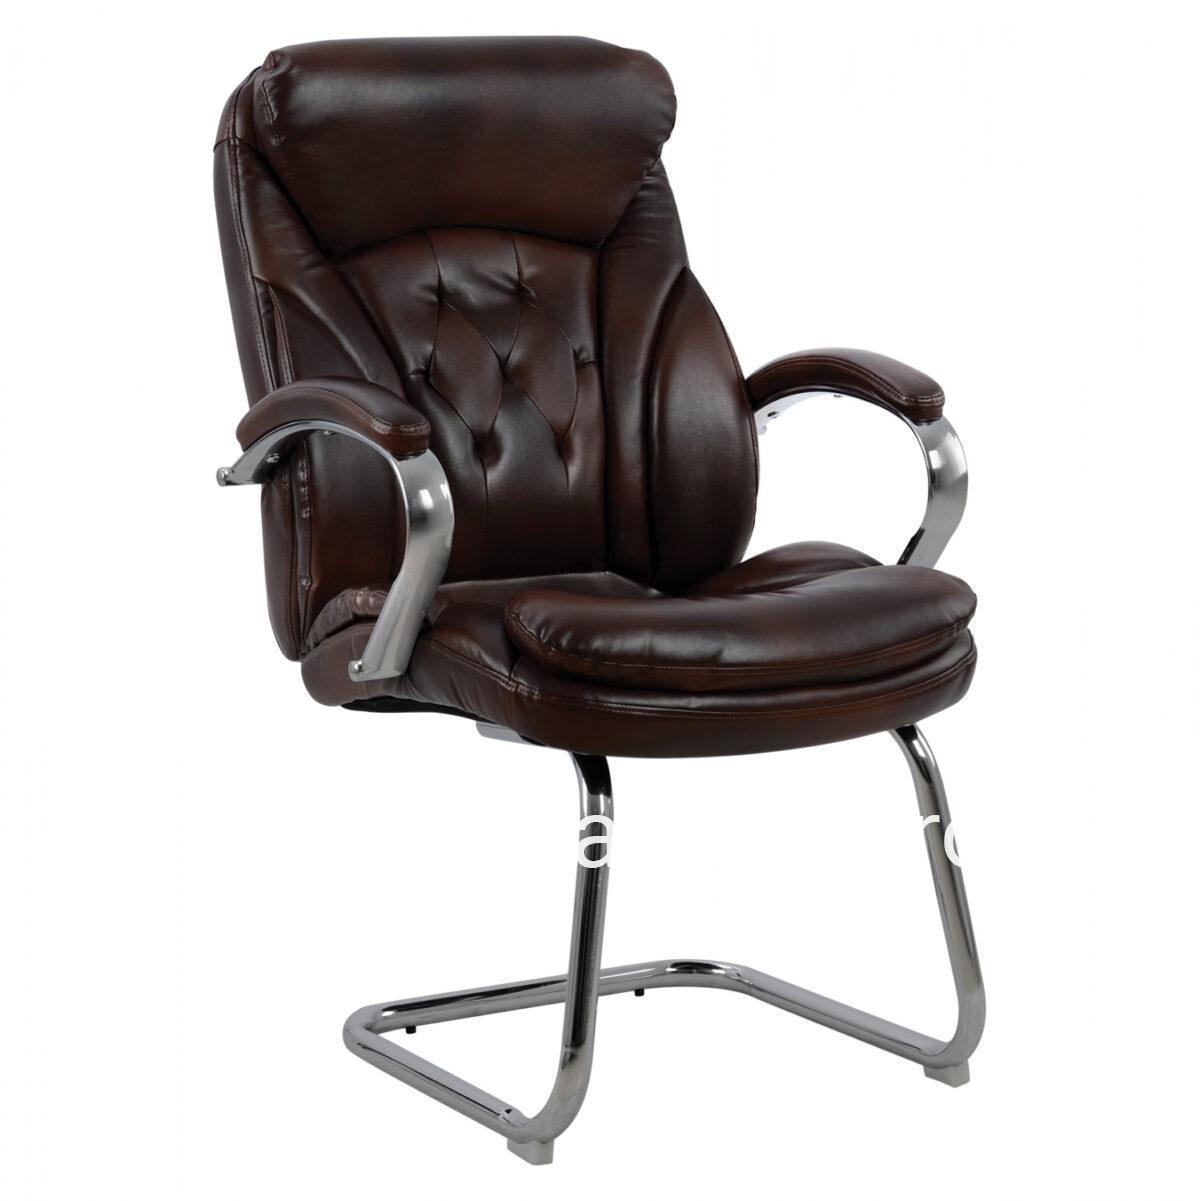 Conference chair HM1100.09 Brown 65x52x105 cm